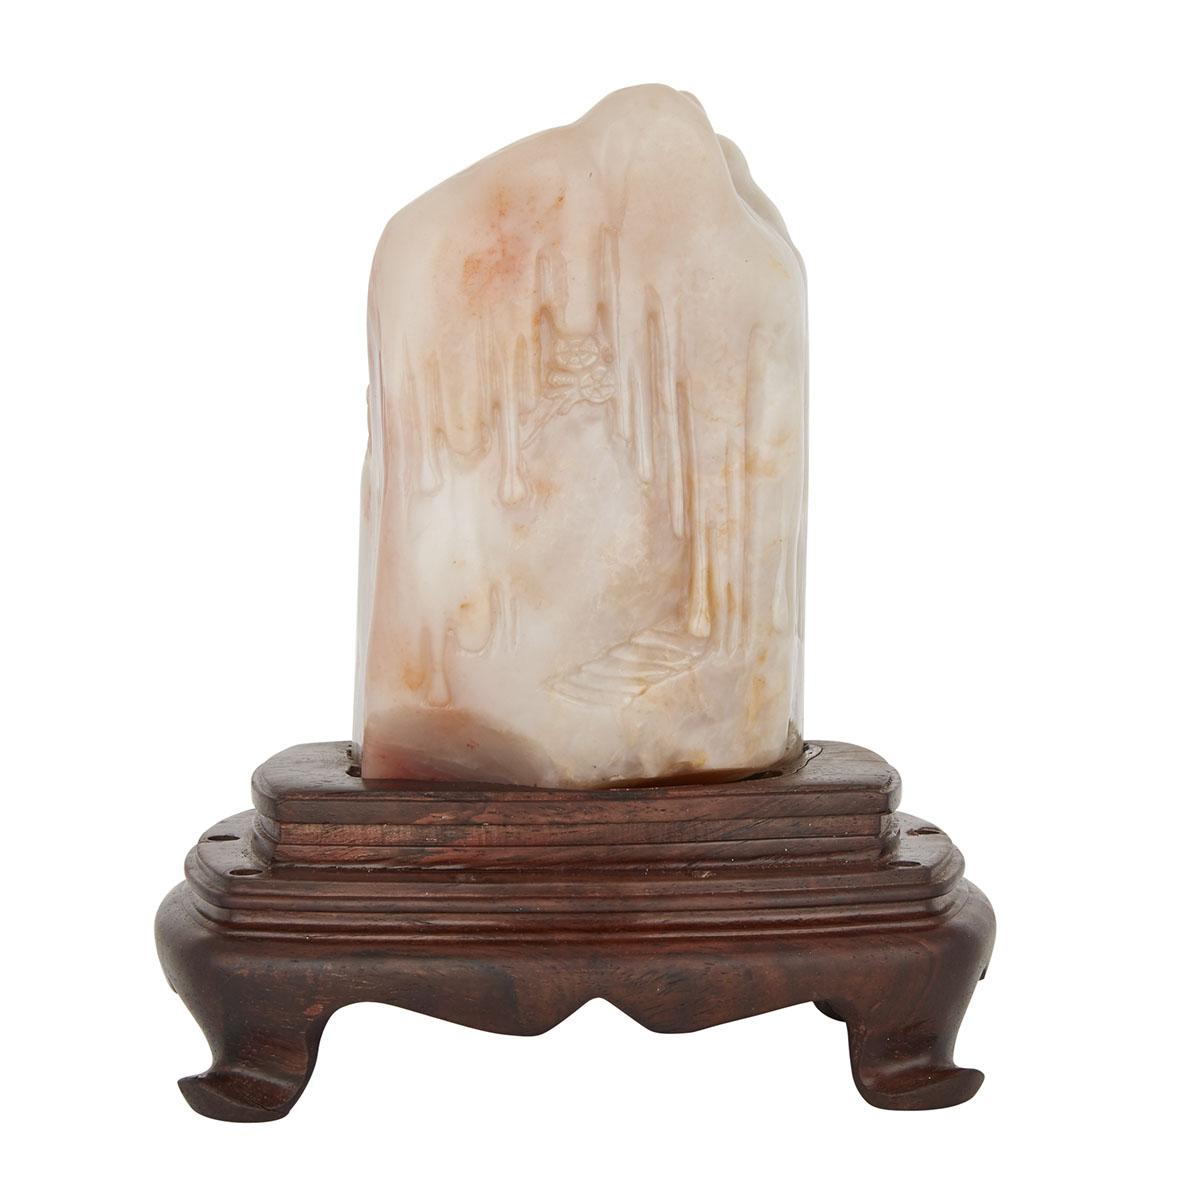 A LARGE AND RARE SHOUSHAN SHANBO STONE WITH A ROSEWOOD STAND 善伯洞石雕山水人物擺件 The creamy pink semi- - Image 2 of 2